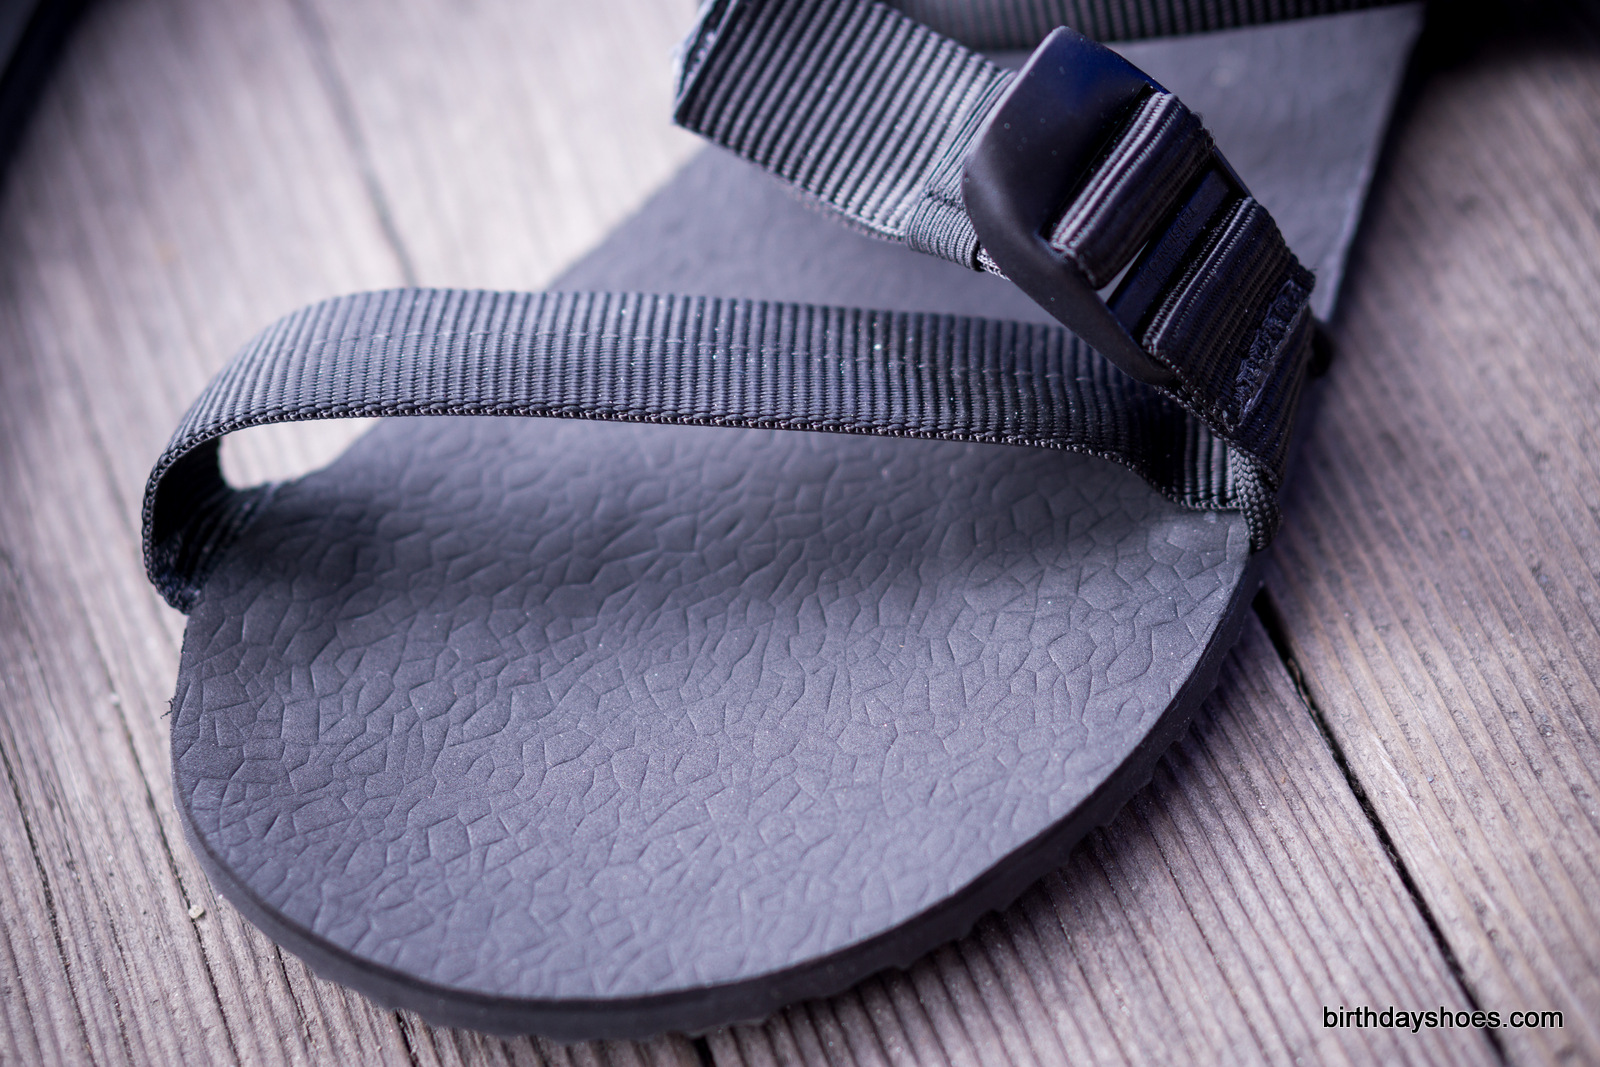 The 2015 Pah Tempe now provides an expansive surface area for your foot, while reinforcing the straps for durability